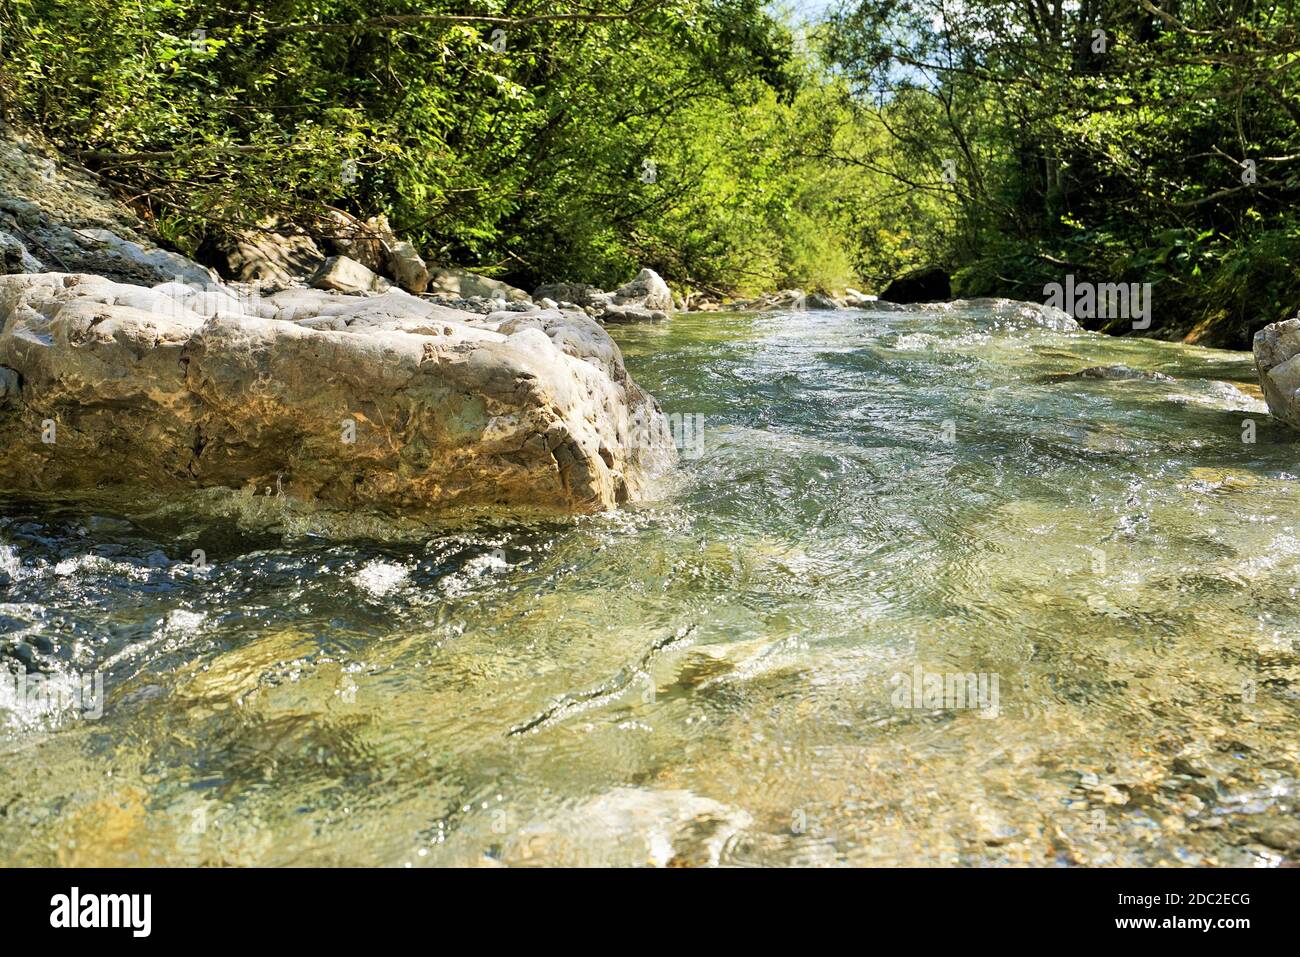 River in the Alps in drinking water quality Stock Photo